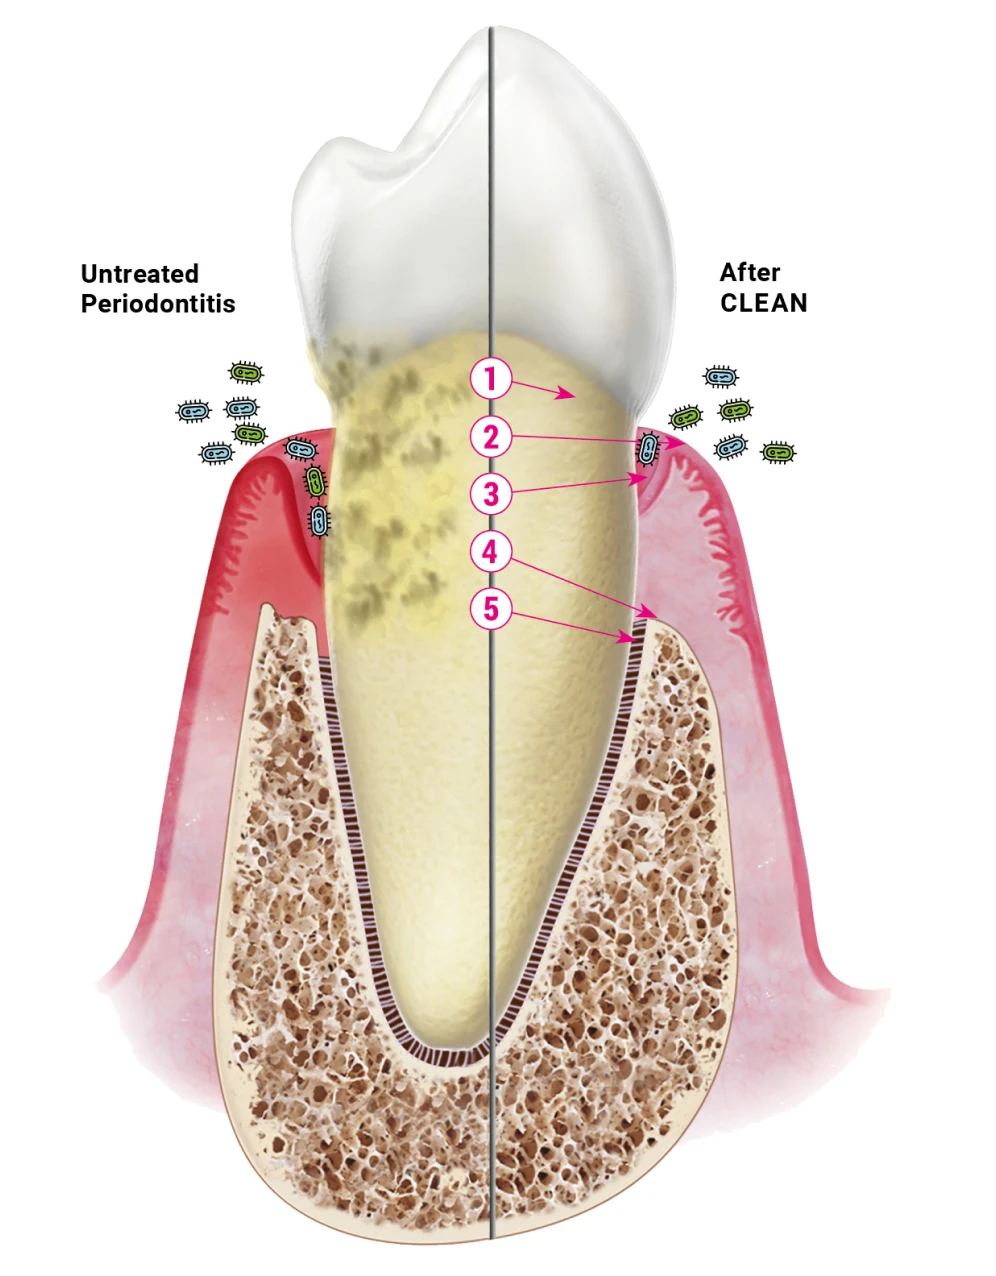 Periodontitis after CLEAN